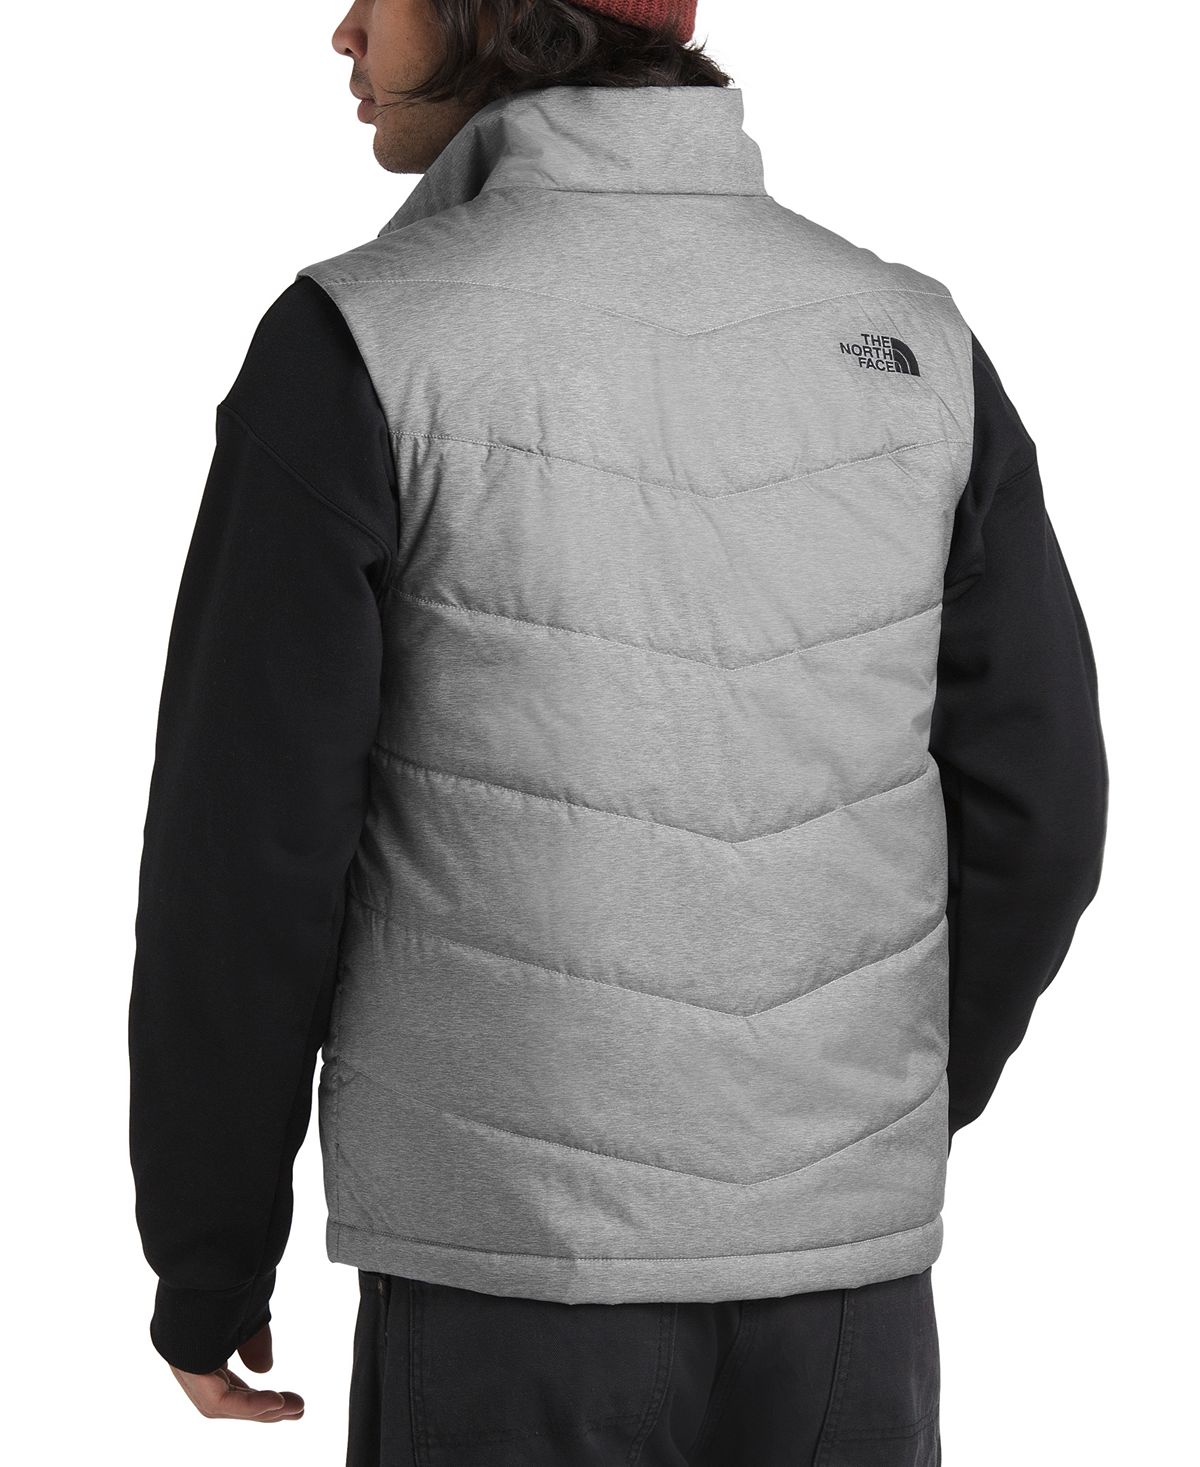 The North Face Junction Insulated Vest Tnf Medium Grey Heather